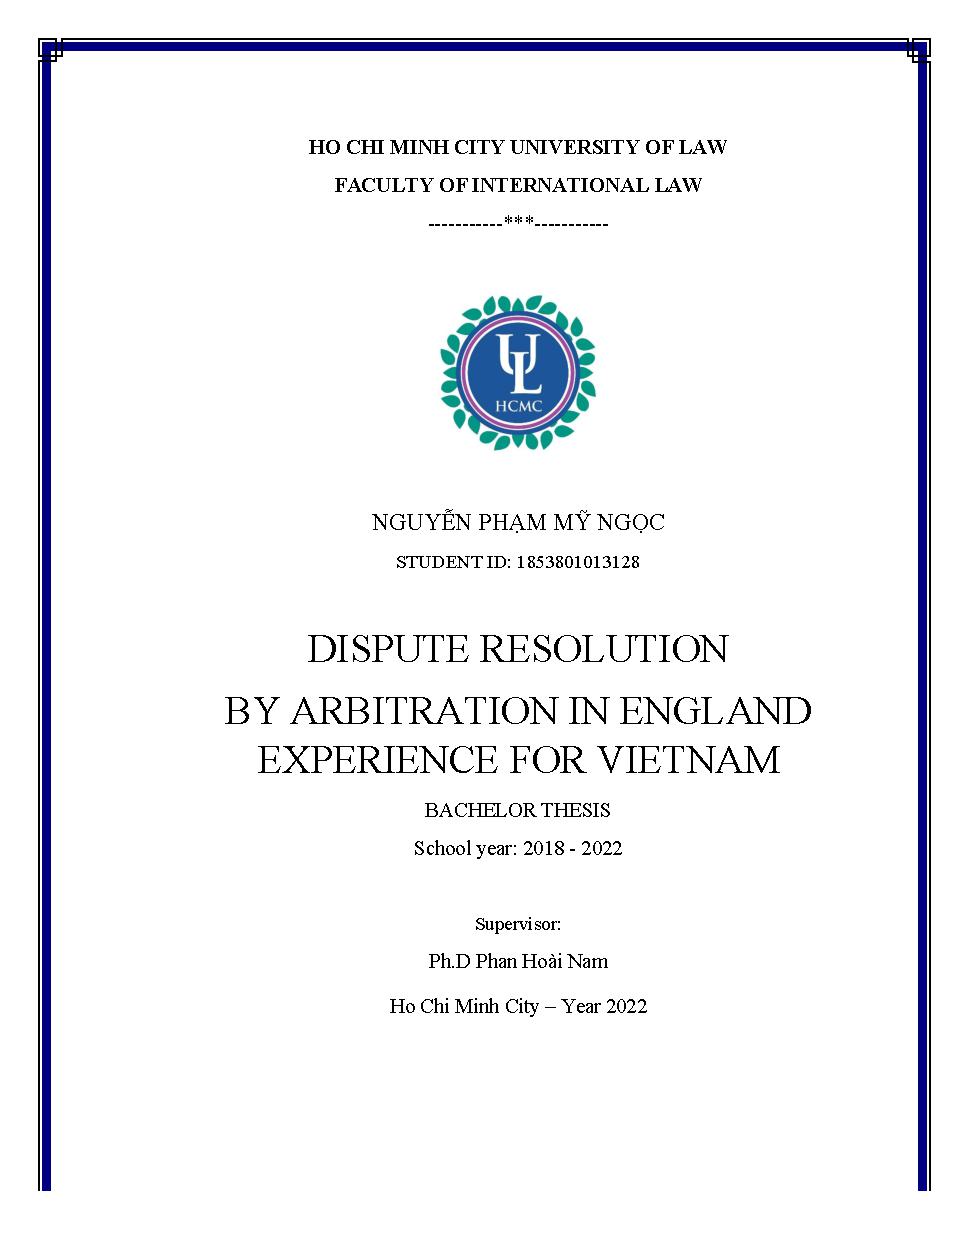 Dispute resolution by arbitration in England - Experience for Vietnam